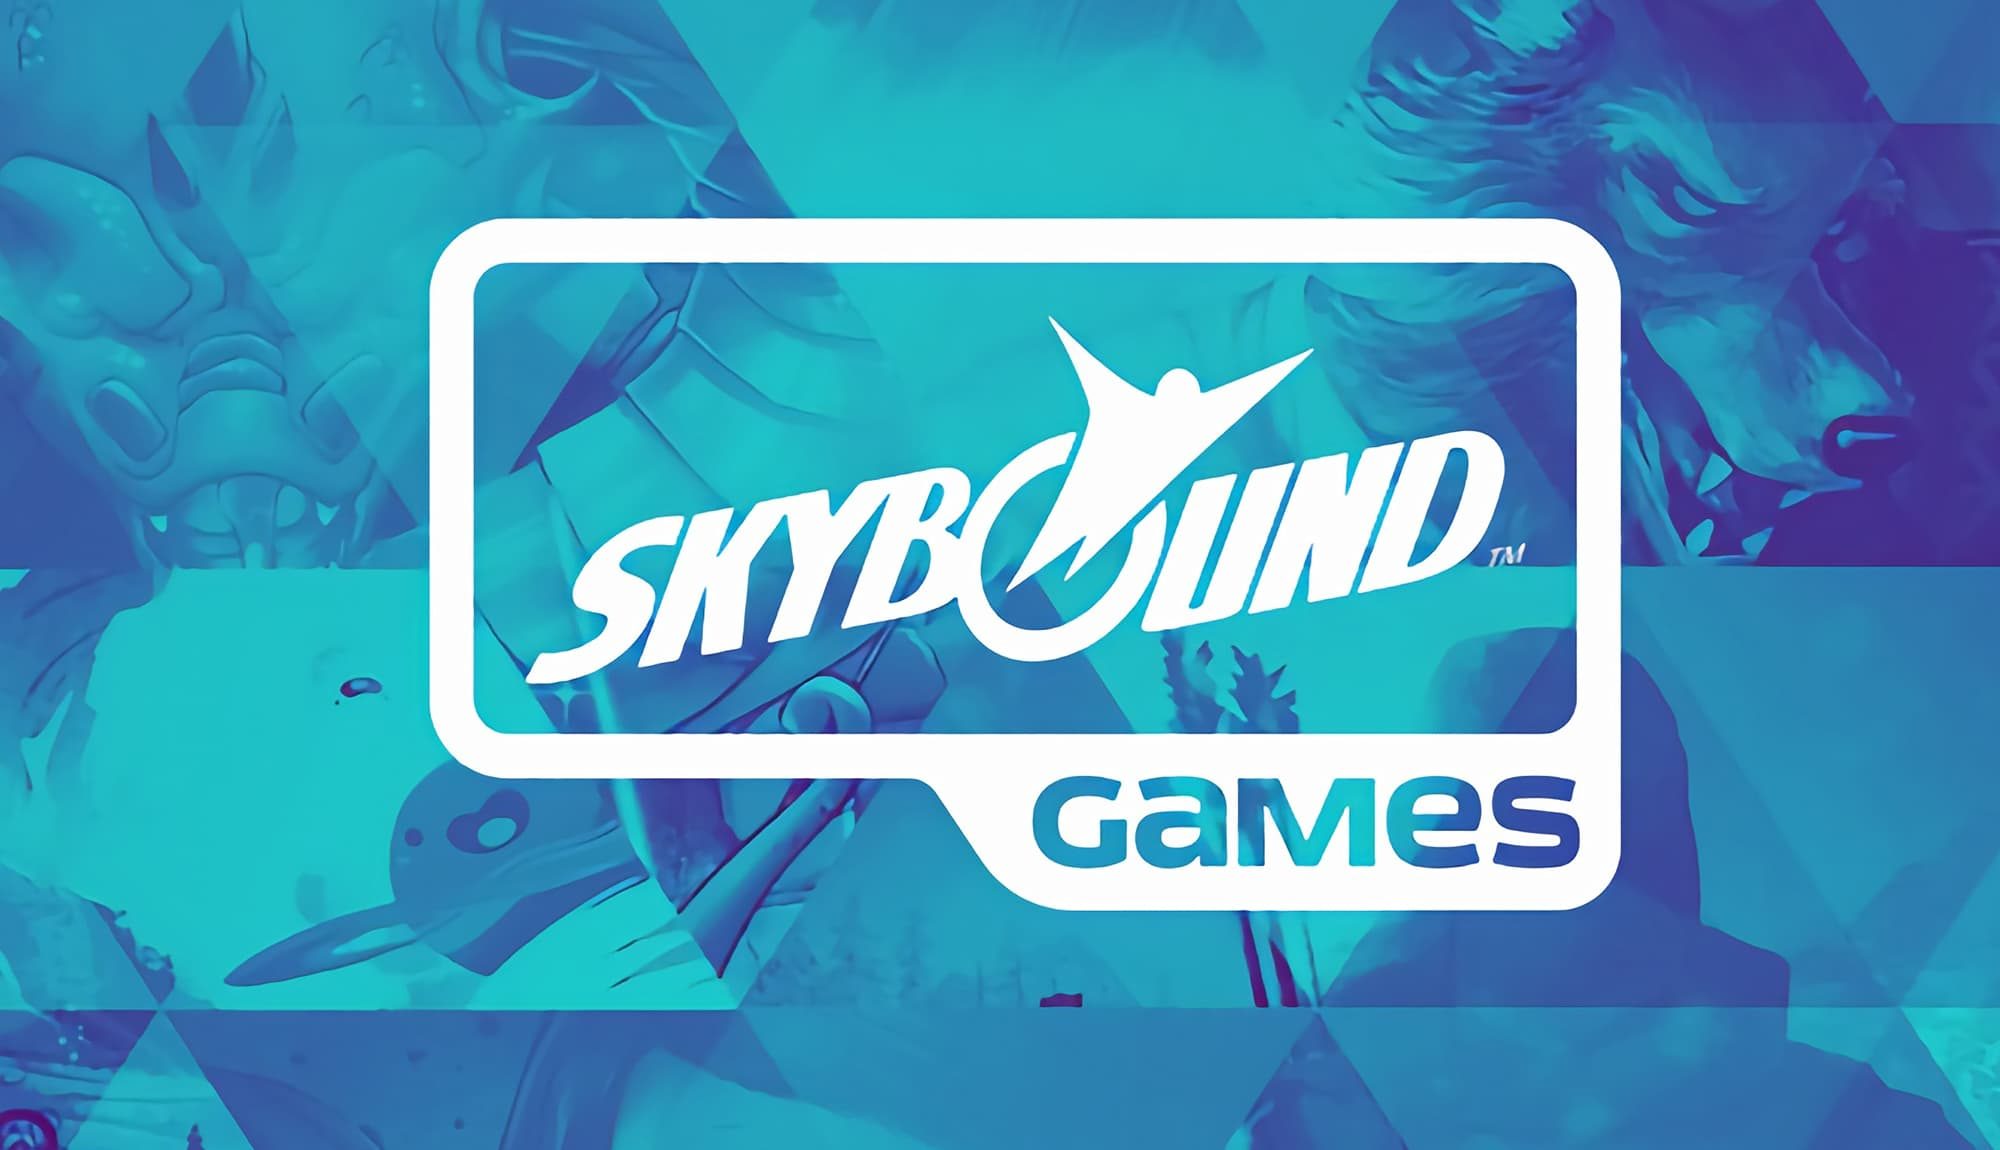 Skybound Games Expands to Video Game Publishing!